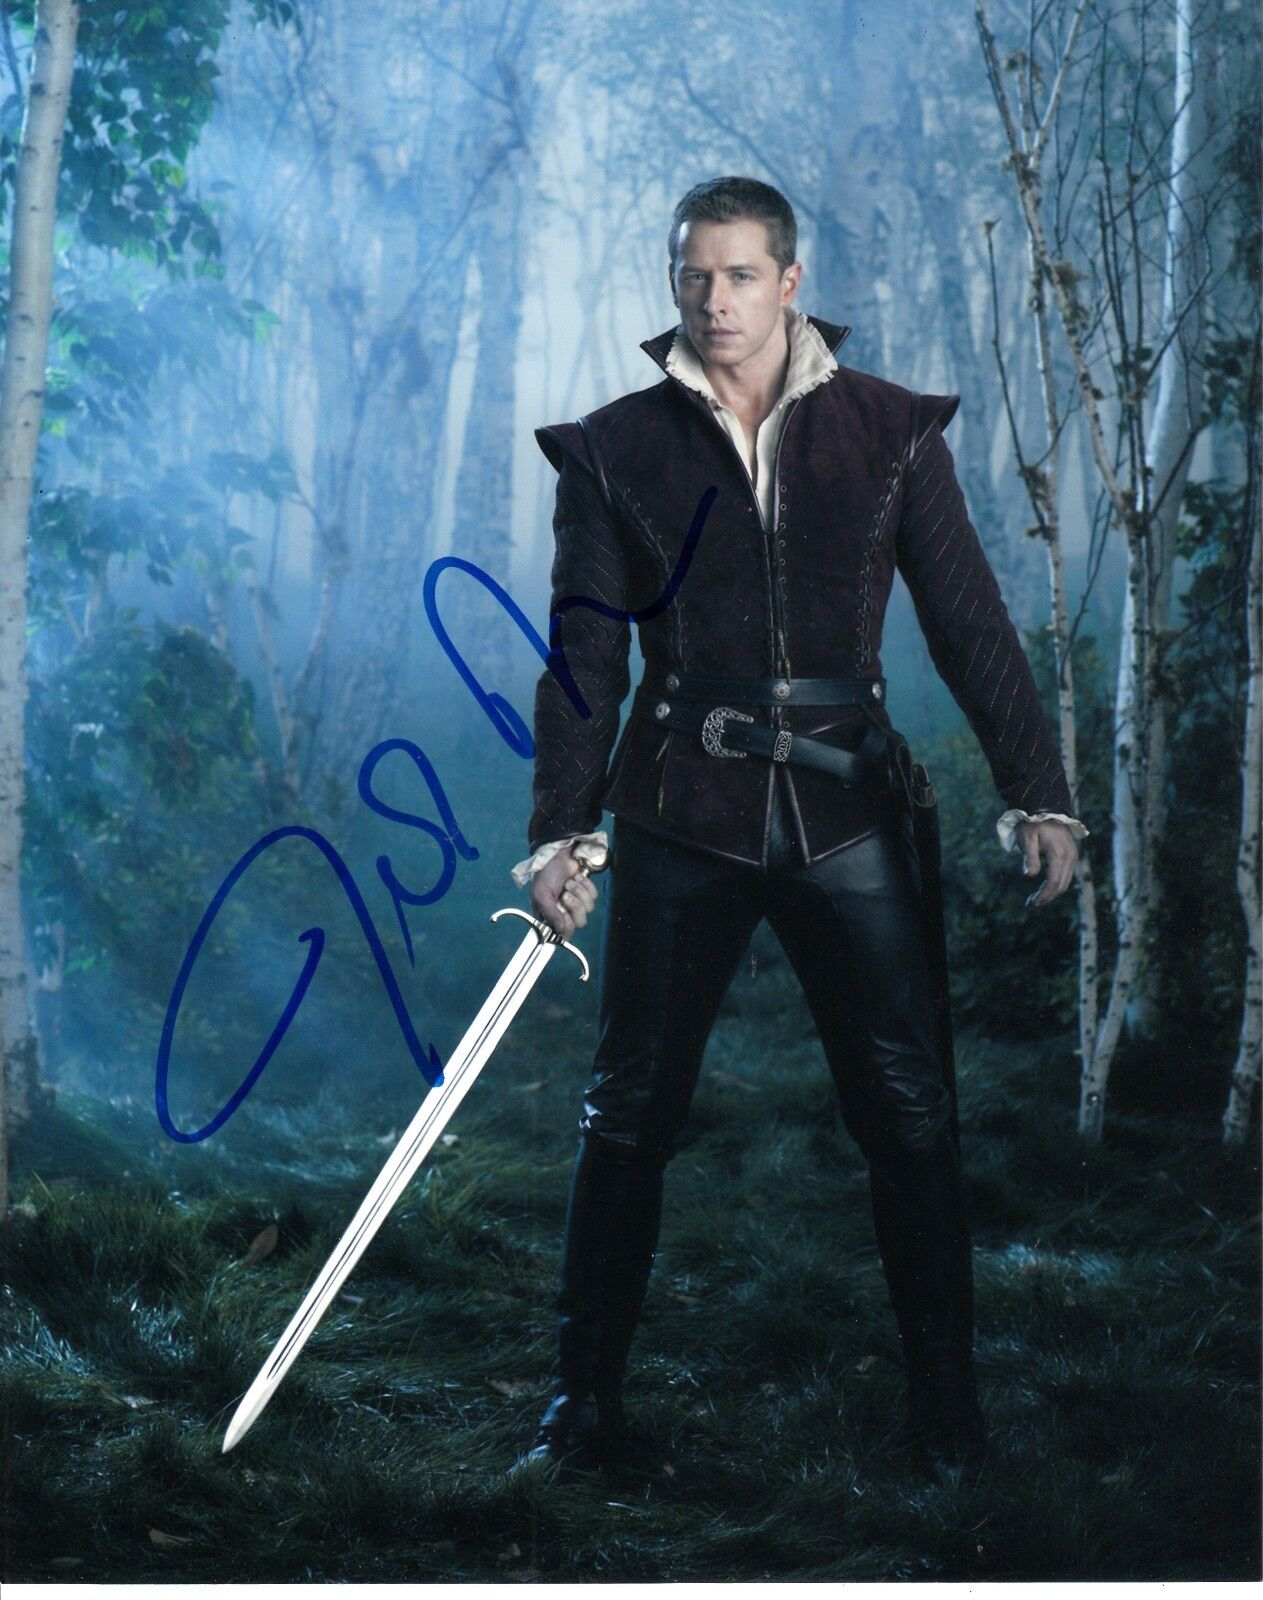 JOSH DALLAS SIGNED ONCE UPON A TIME Photo Poster painting UACC REG 242 (1)